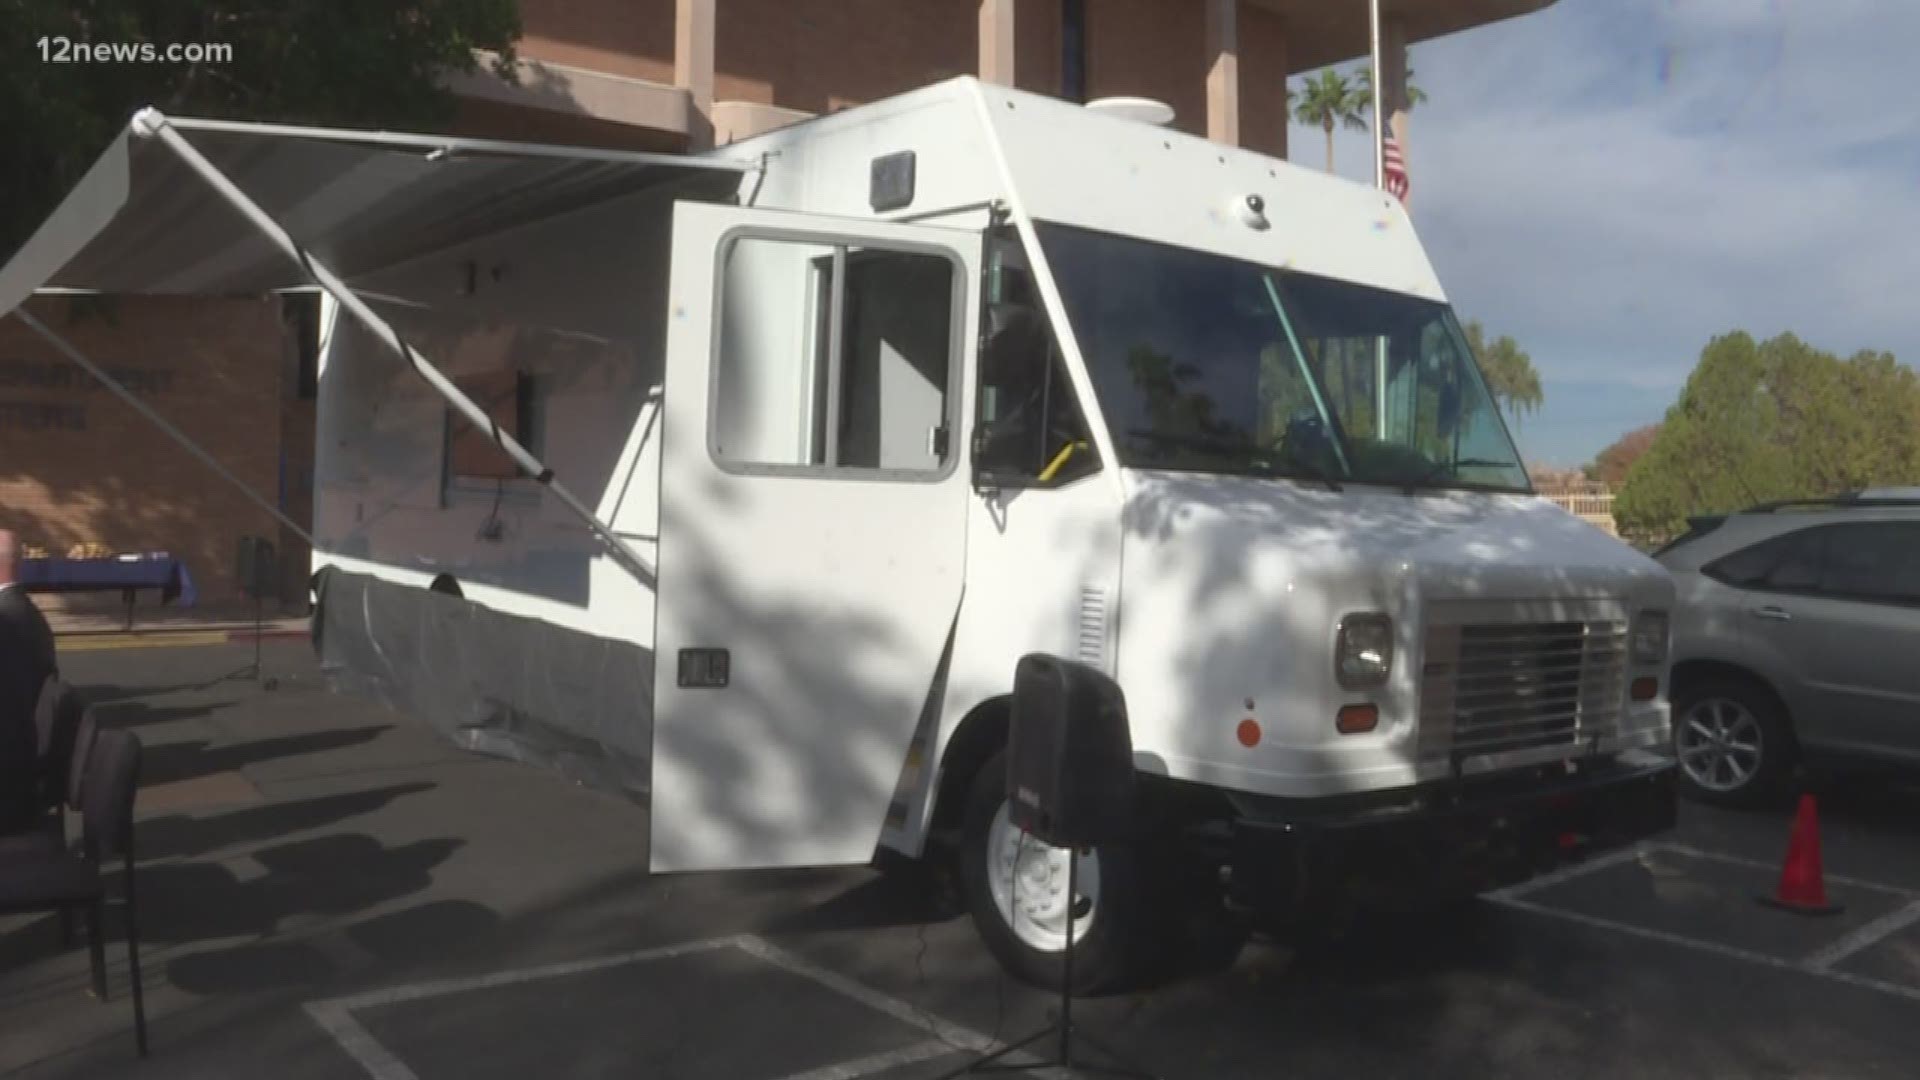 Mesa received a mobile forensics lab that will go out to investigating scenes to help officers process electronic devices like phones and computers. The lab was donated to Mesa PD, so it cost the city of Mesa nothing.